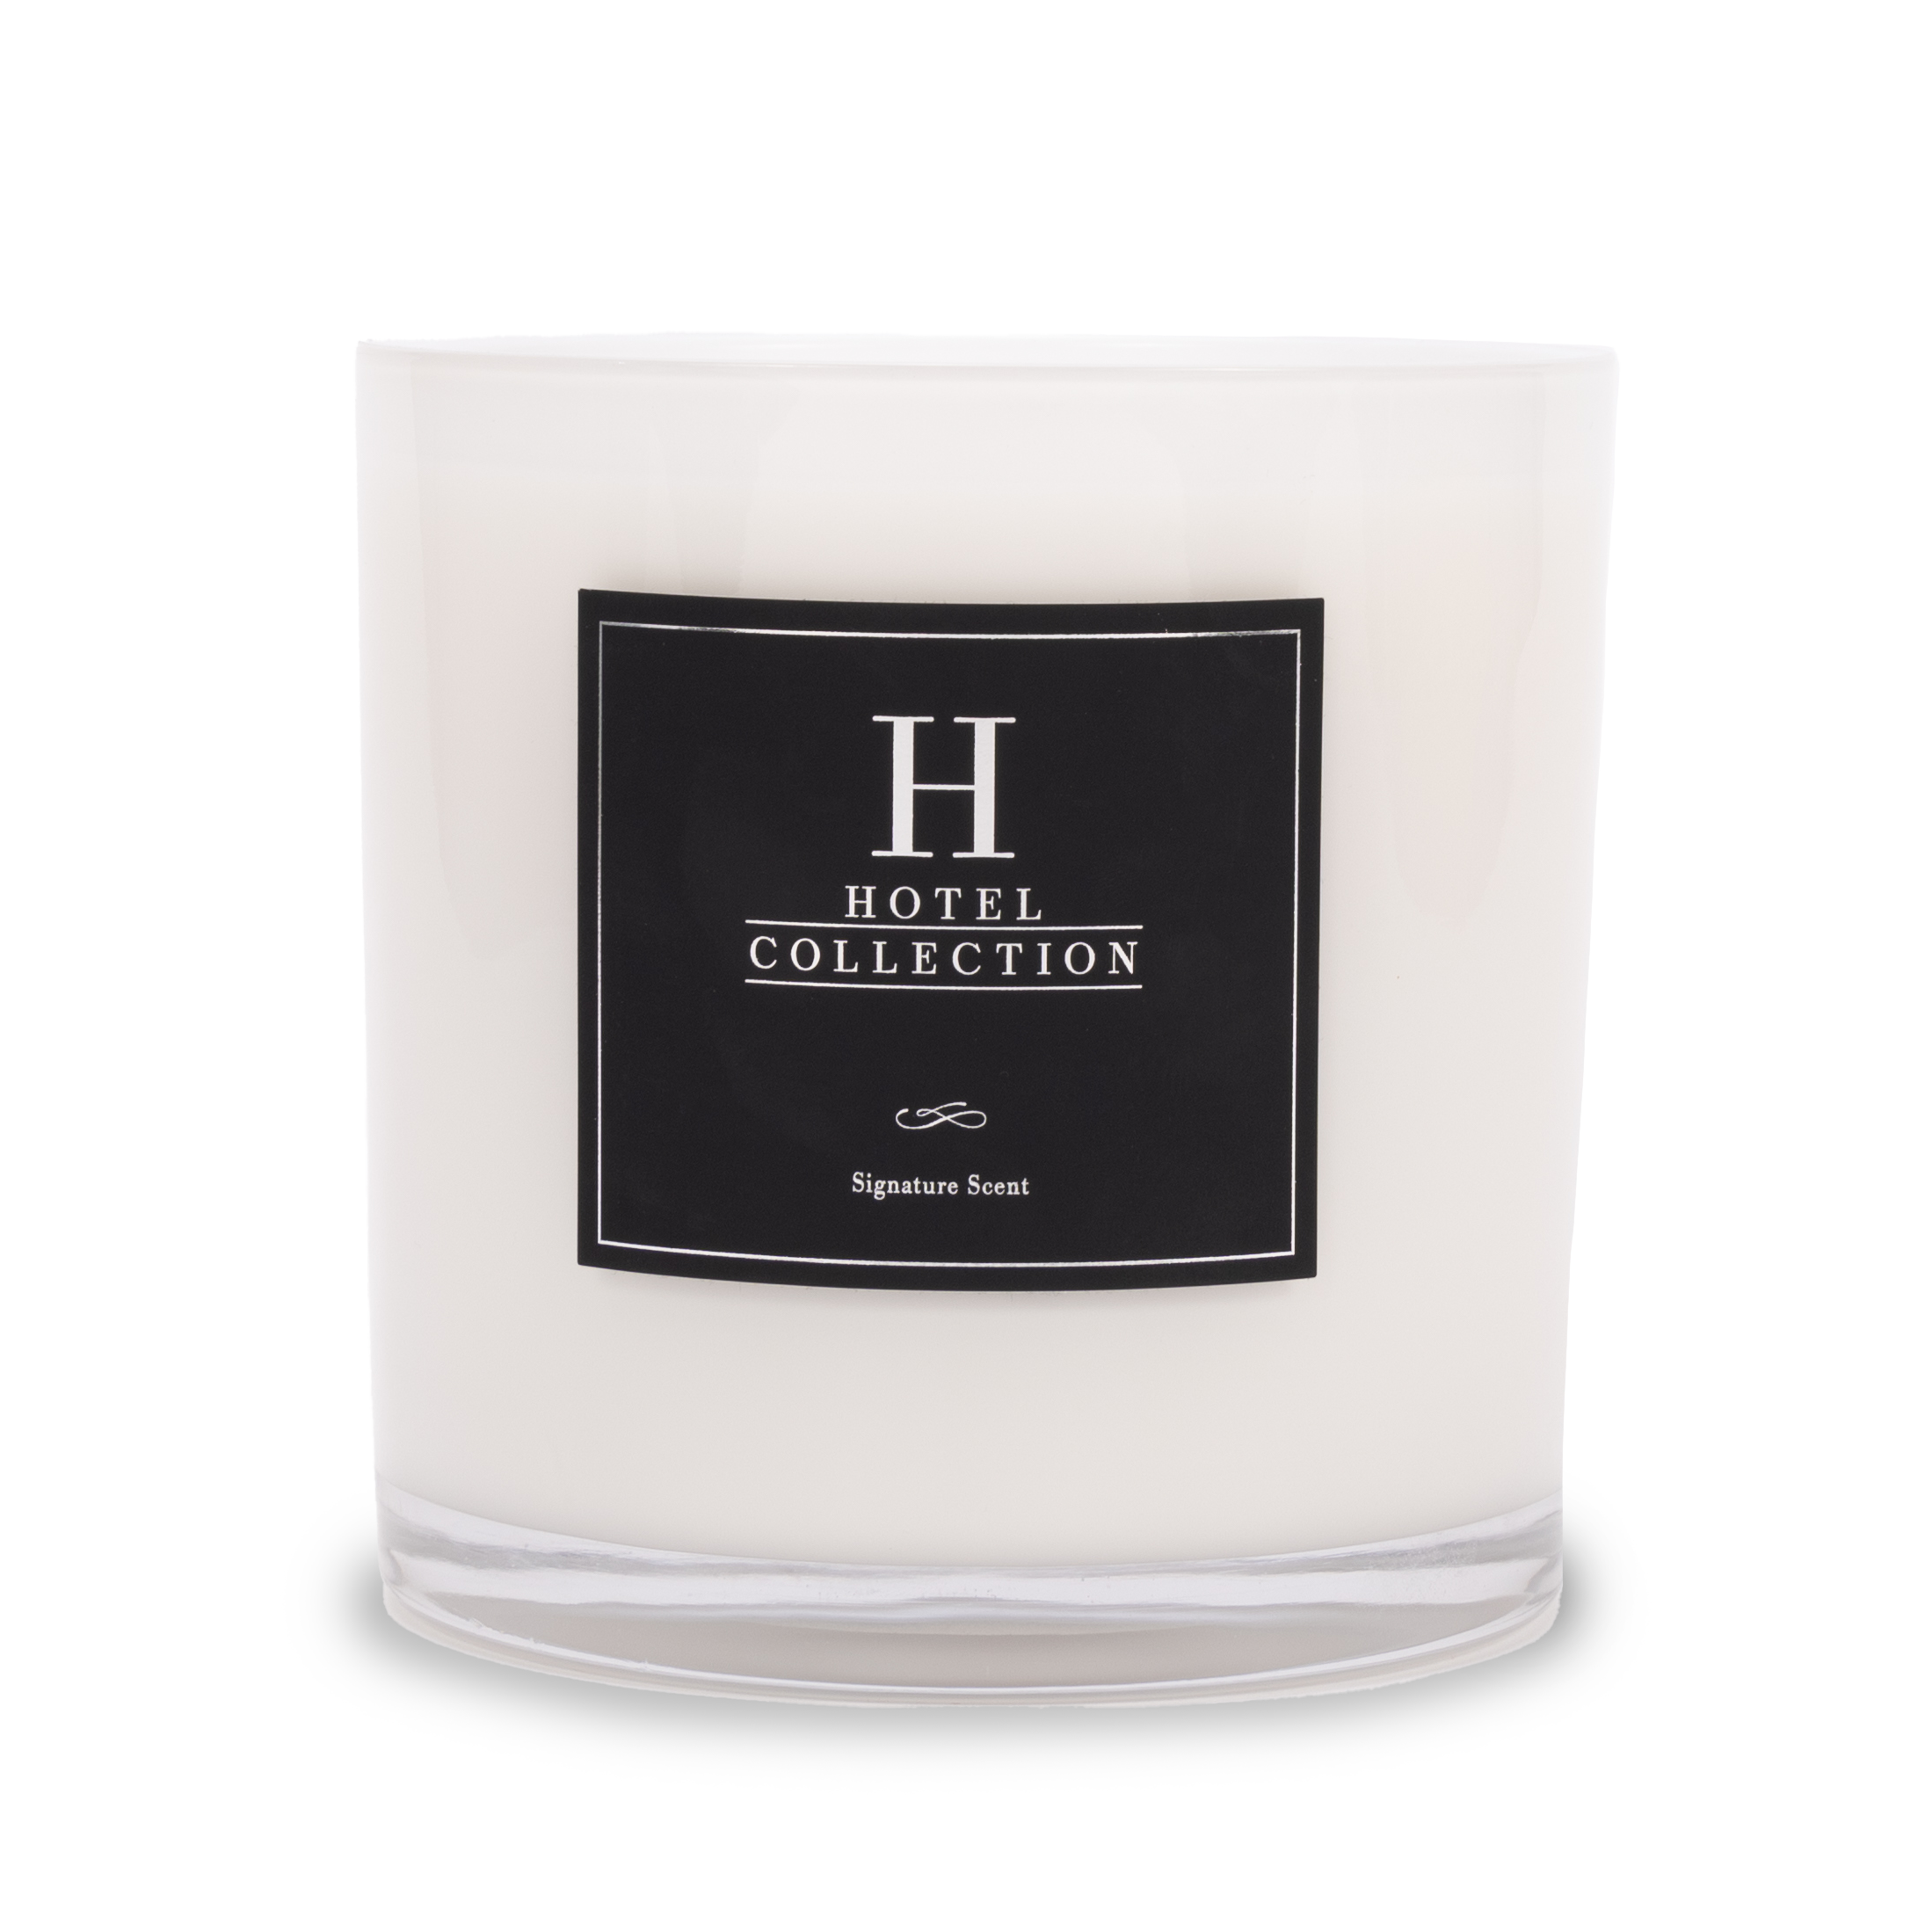 Deluxe Desert Rose™ Candle